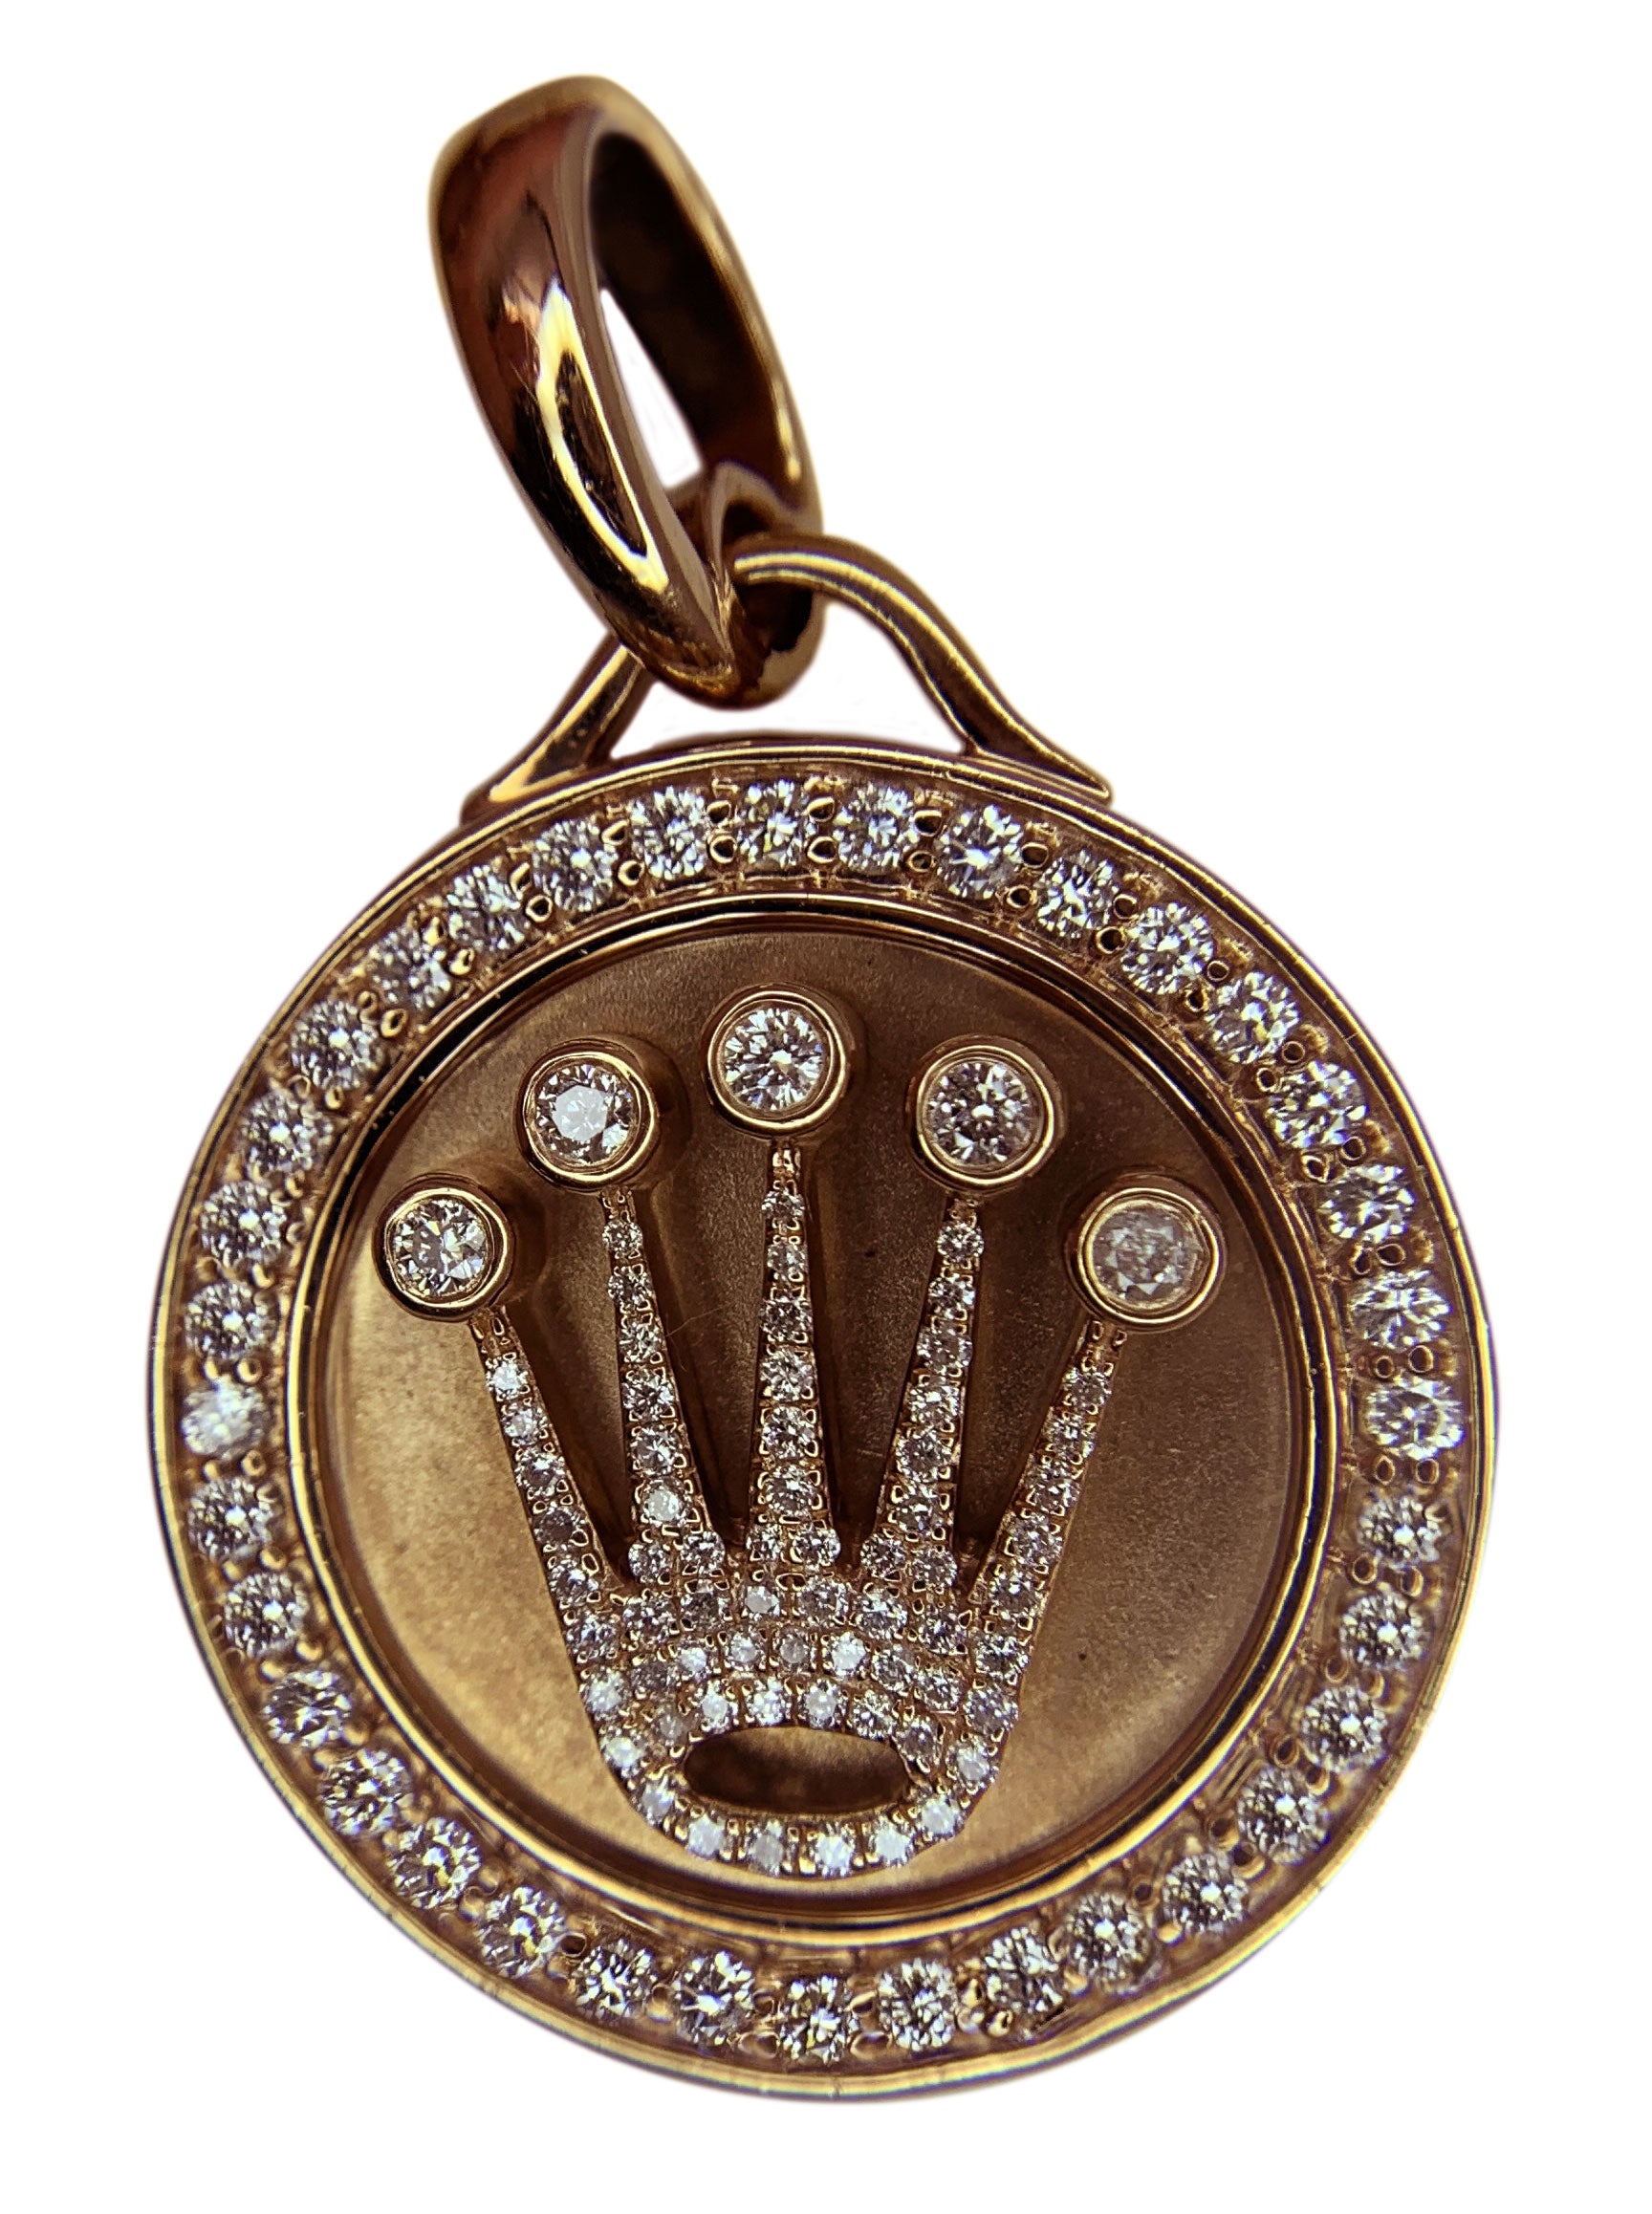 14 KT ROSE GOLD - ROLEX CROWN PENDANT WITH ROUND DIAMOND - 3.00 CT